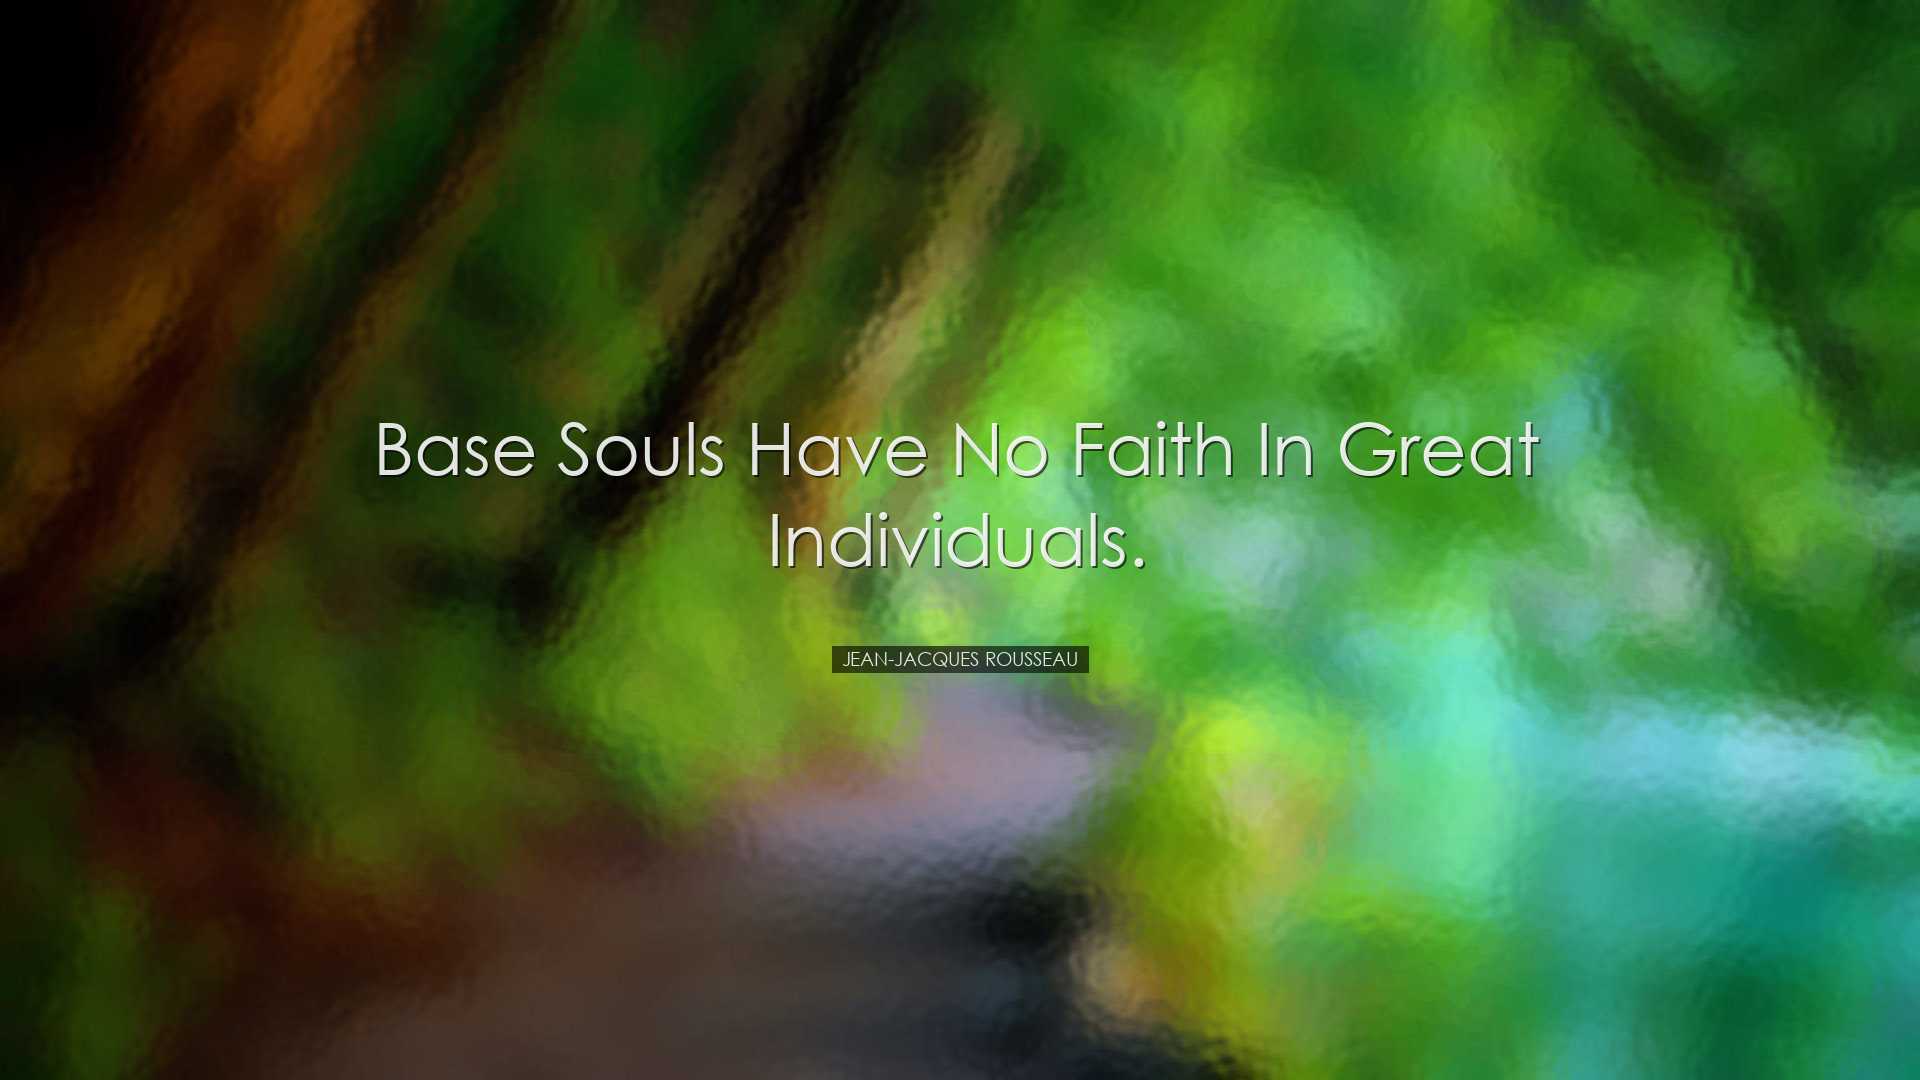 Base souls have no faith in great individuals. - Jean-Jacques Rous